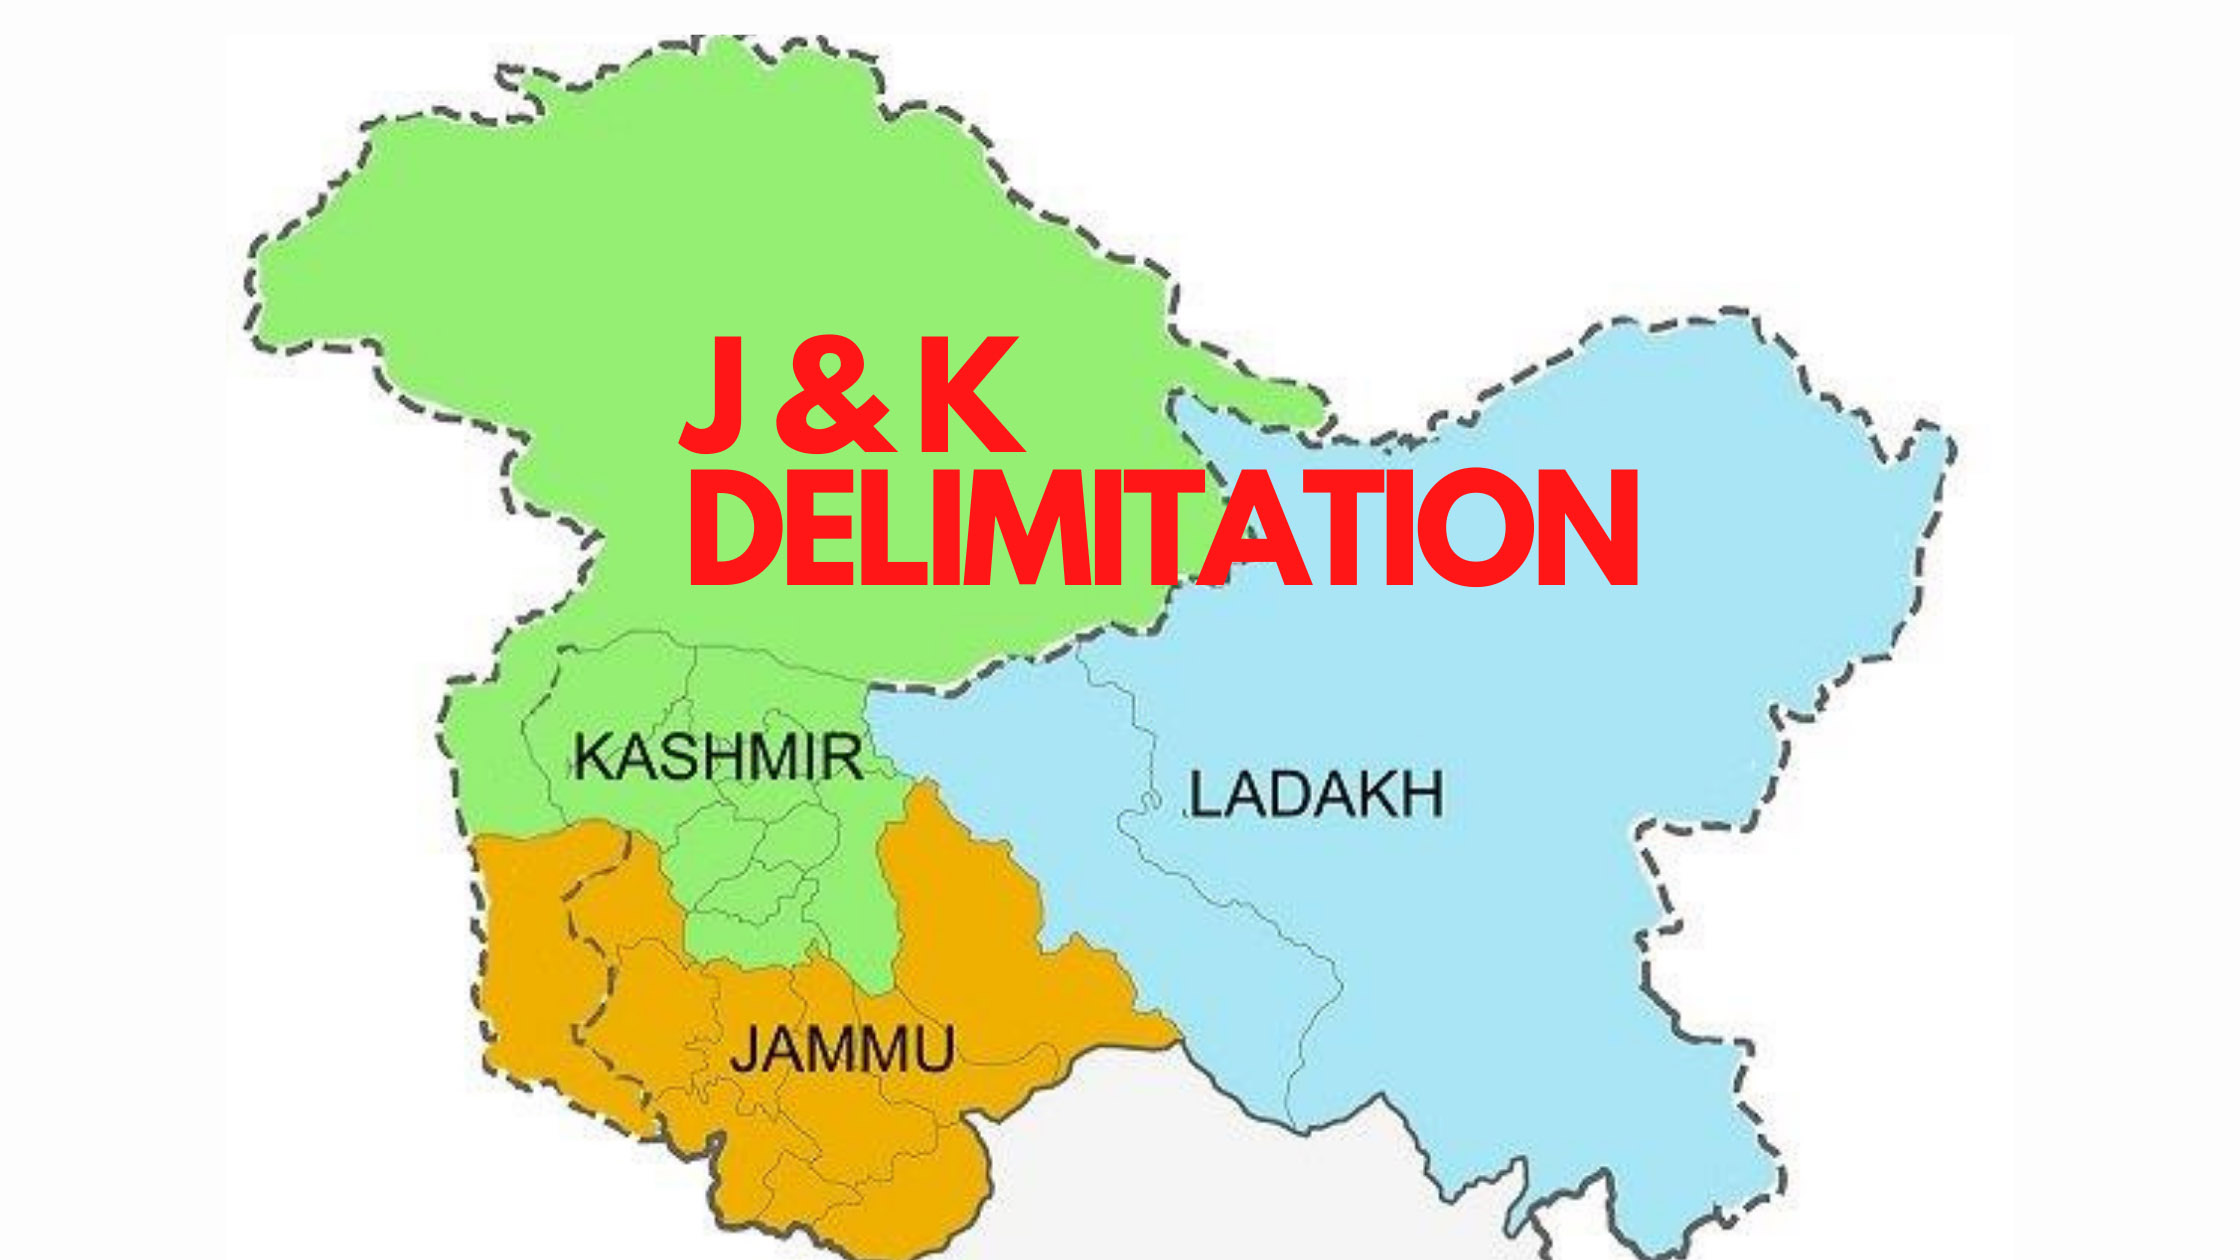 Delimitation Commission submits final recommendation for J&K, 43 seats for Jammu, 47 for Kashmir